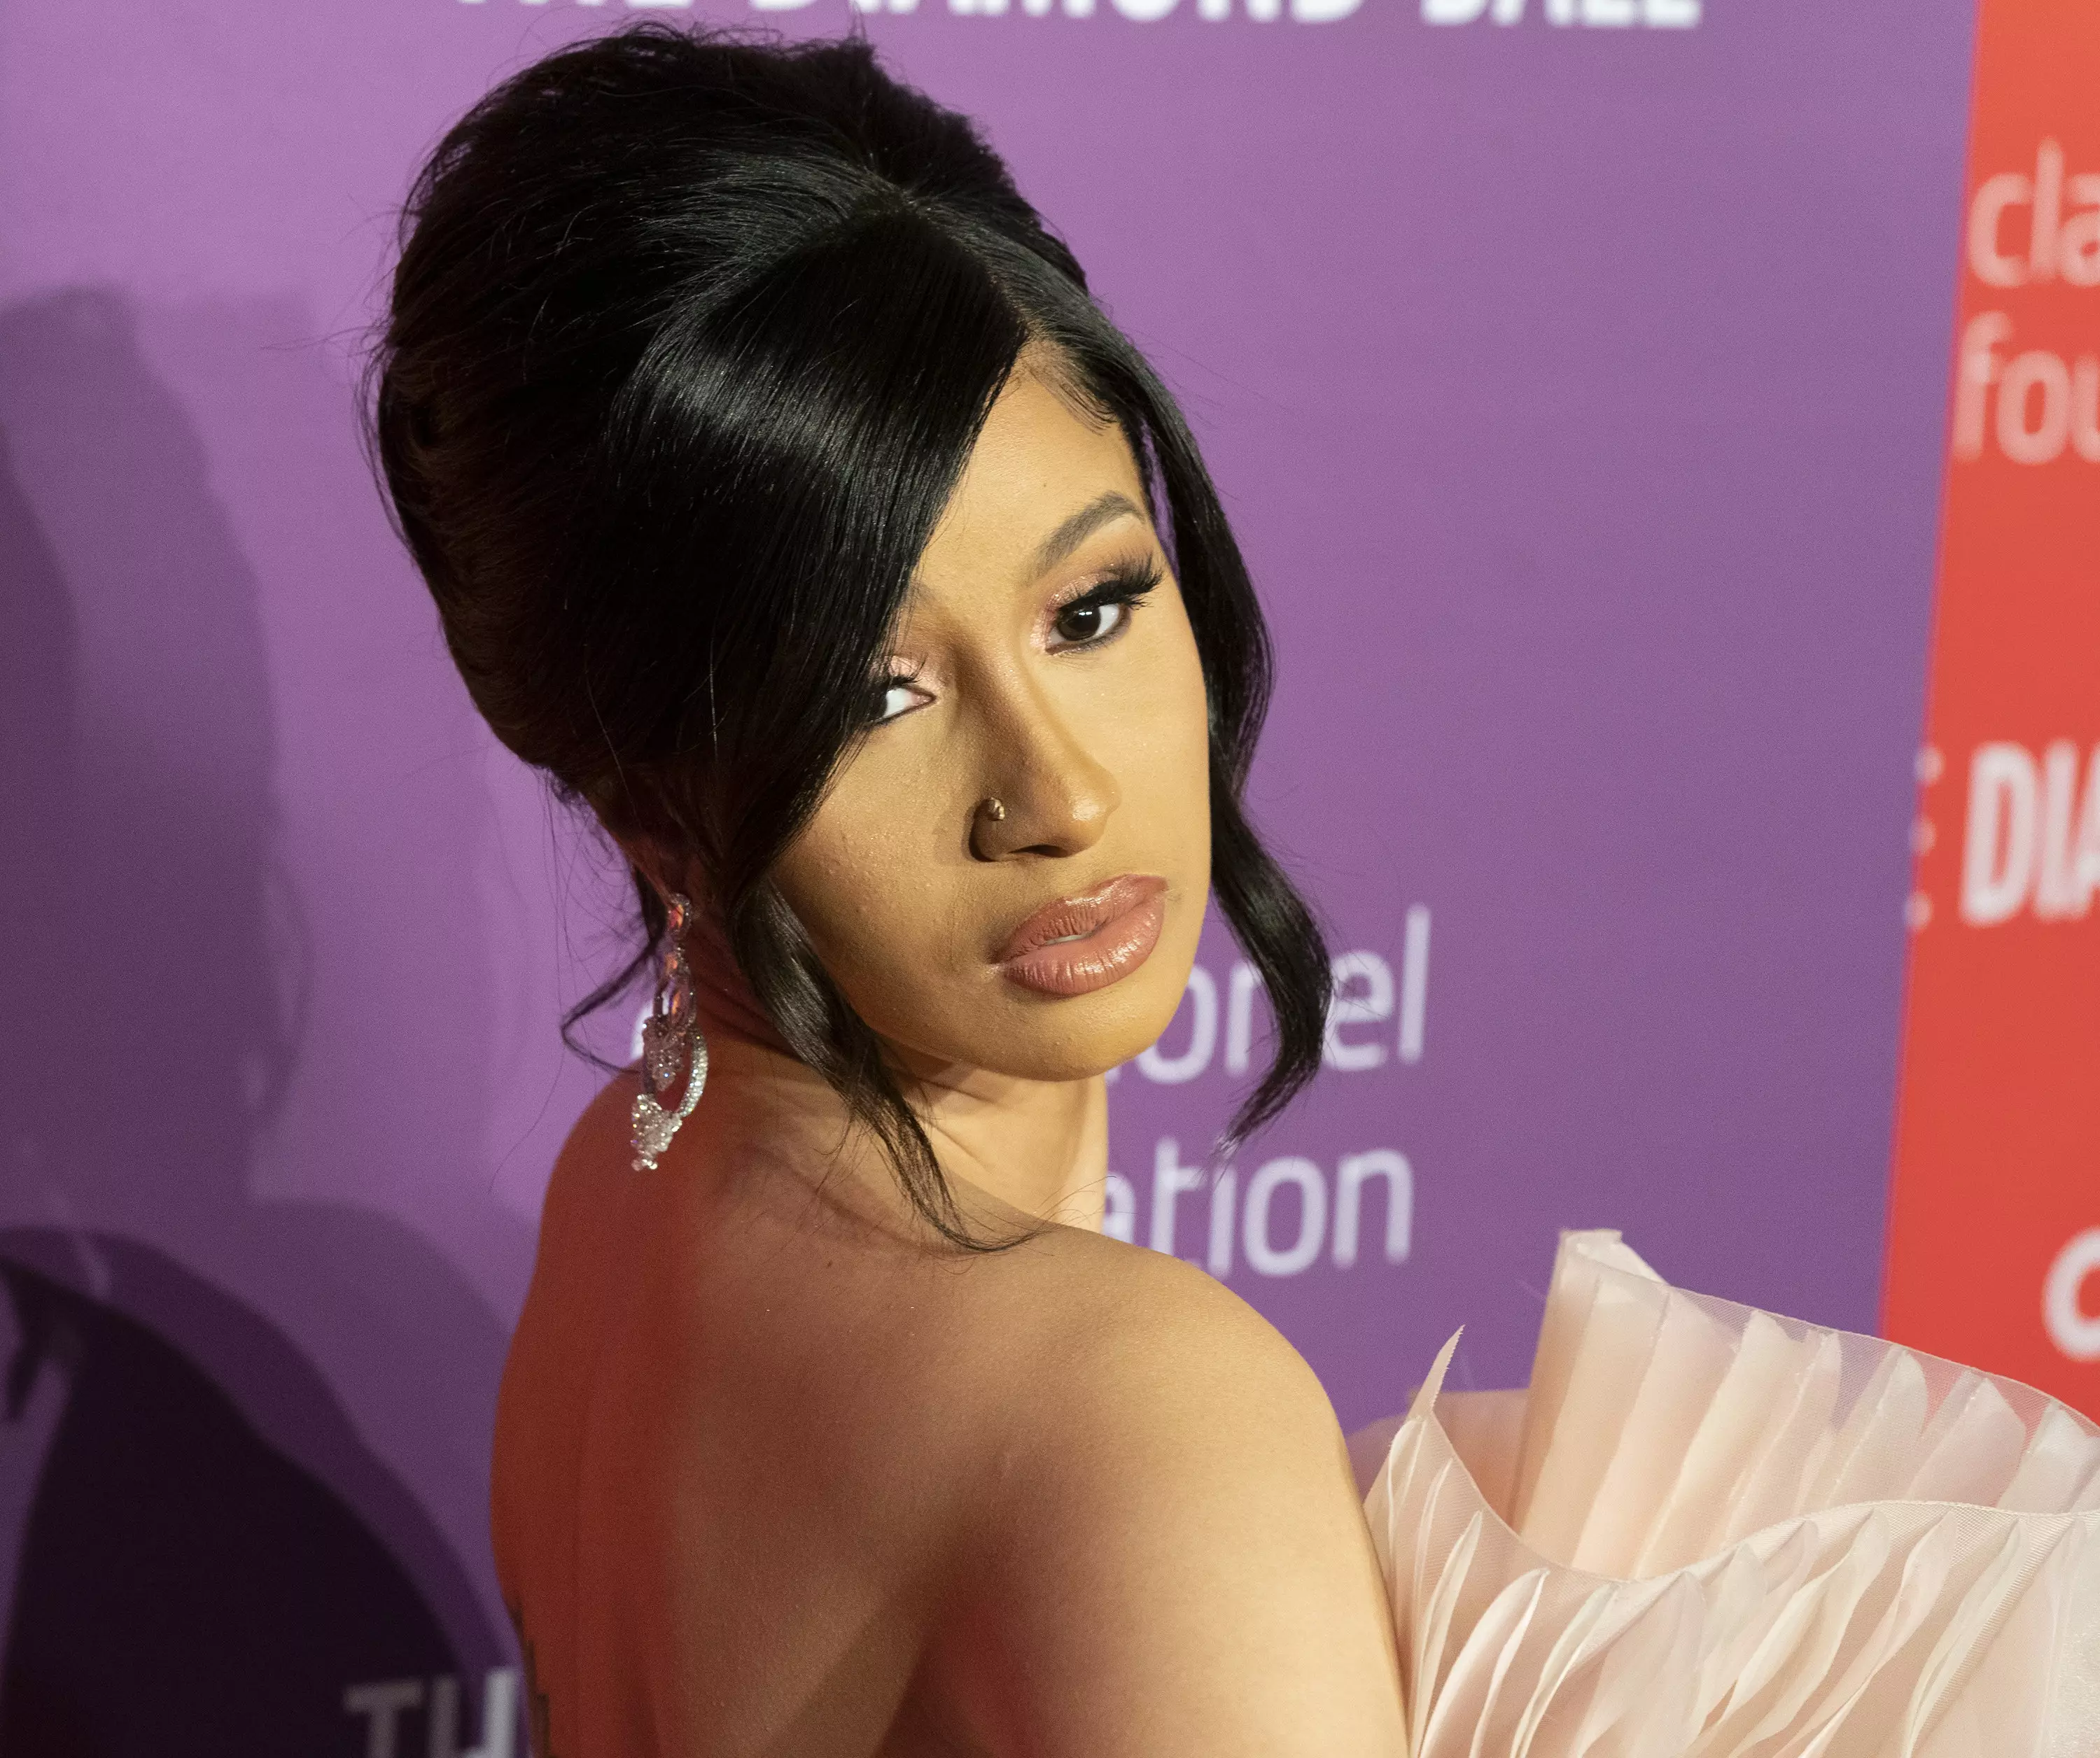 Cardi B has previously spoken about being in the Bloods.